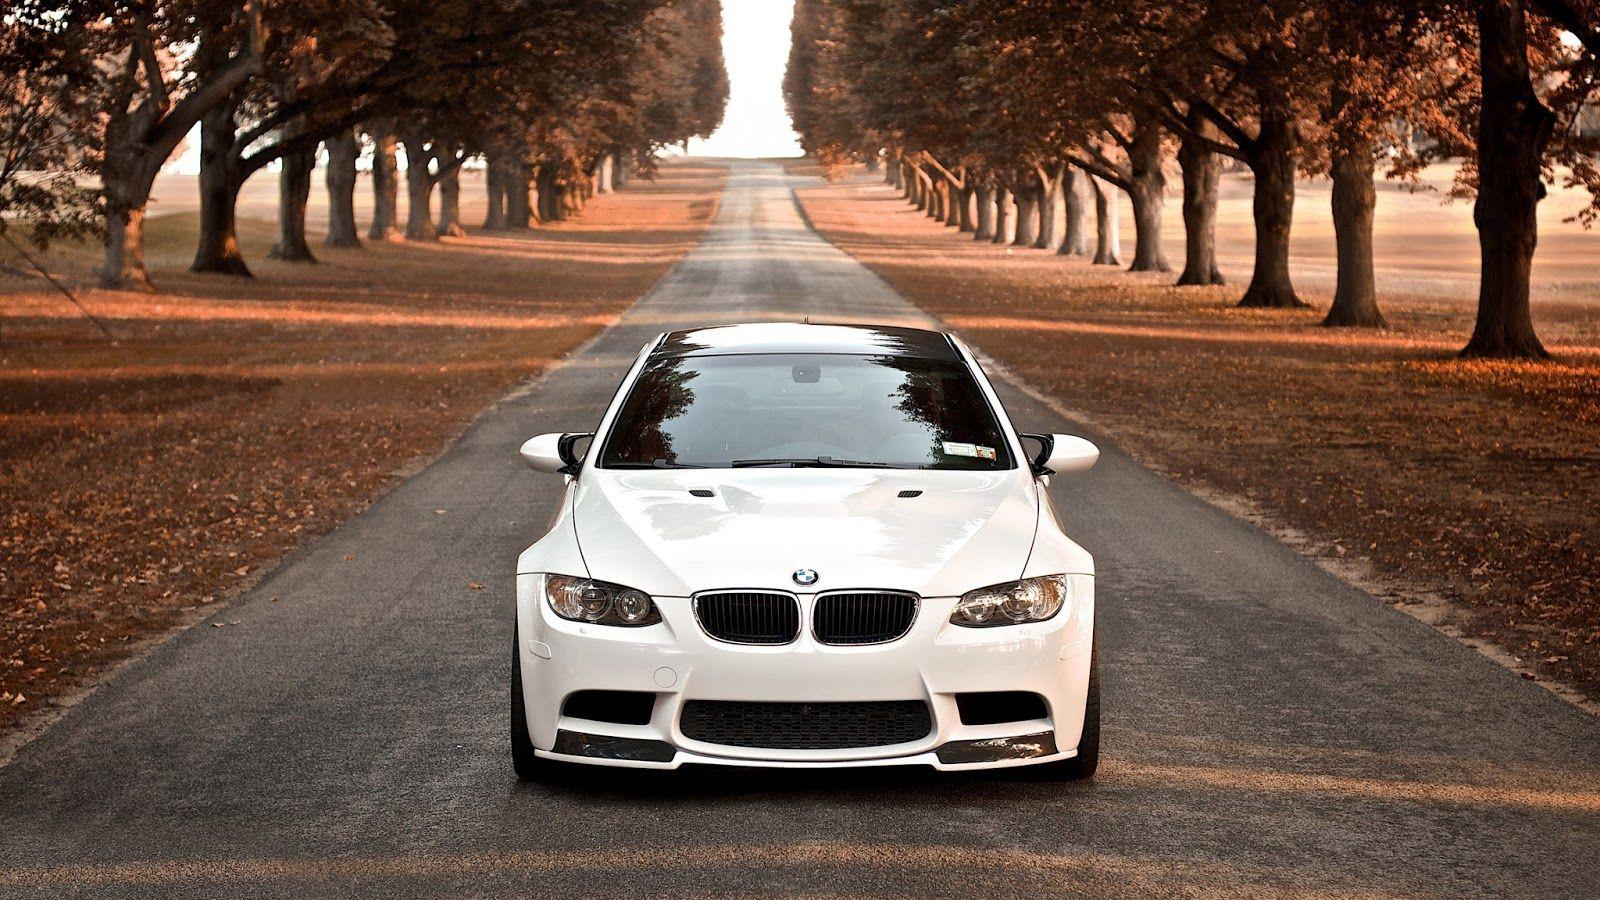 BMW Cars Wallpapers - Wallpaper Cave